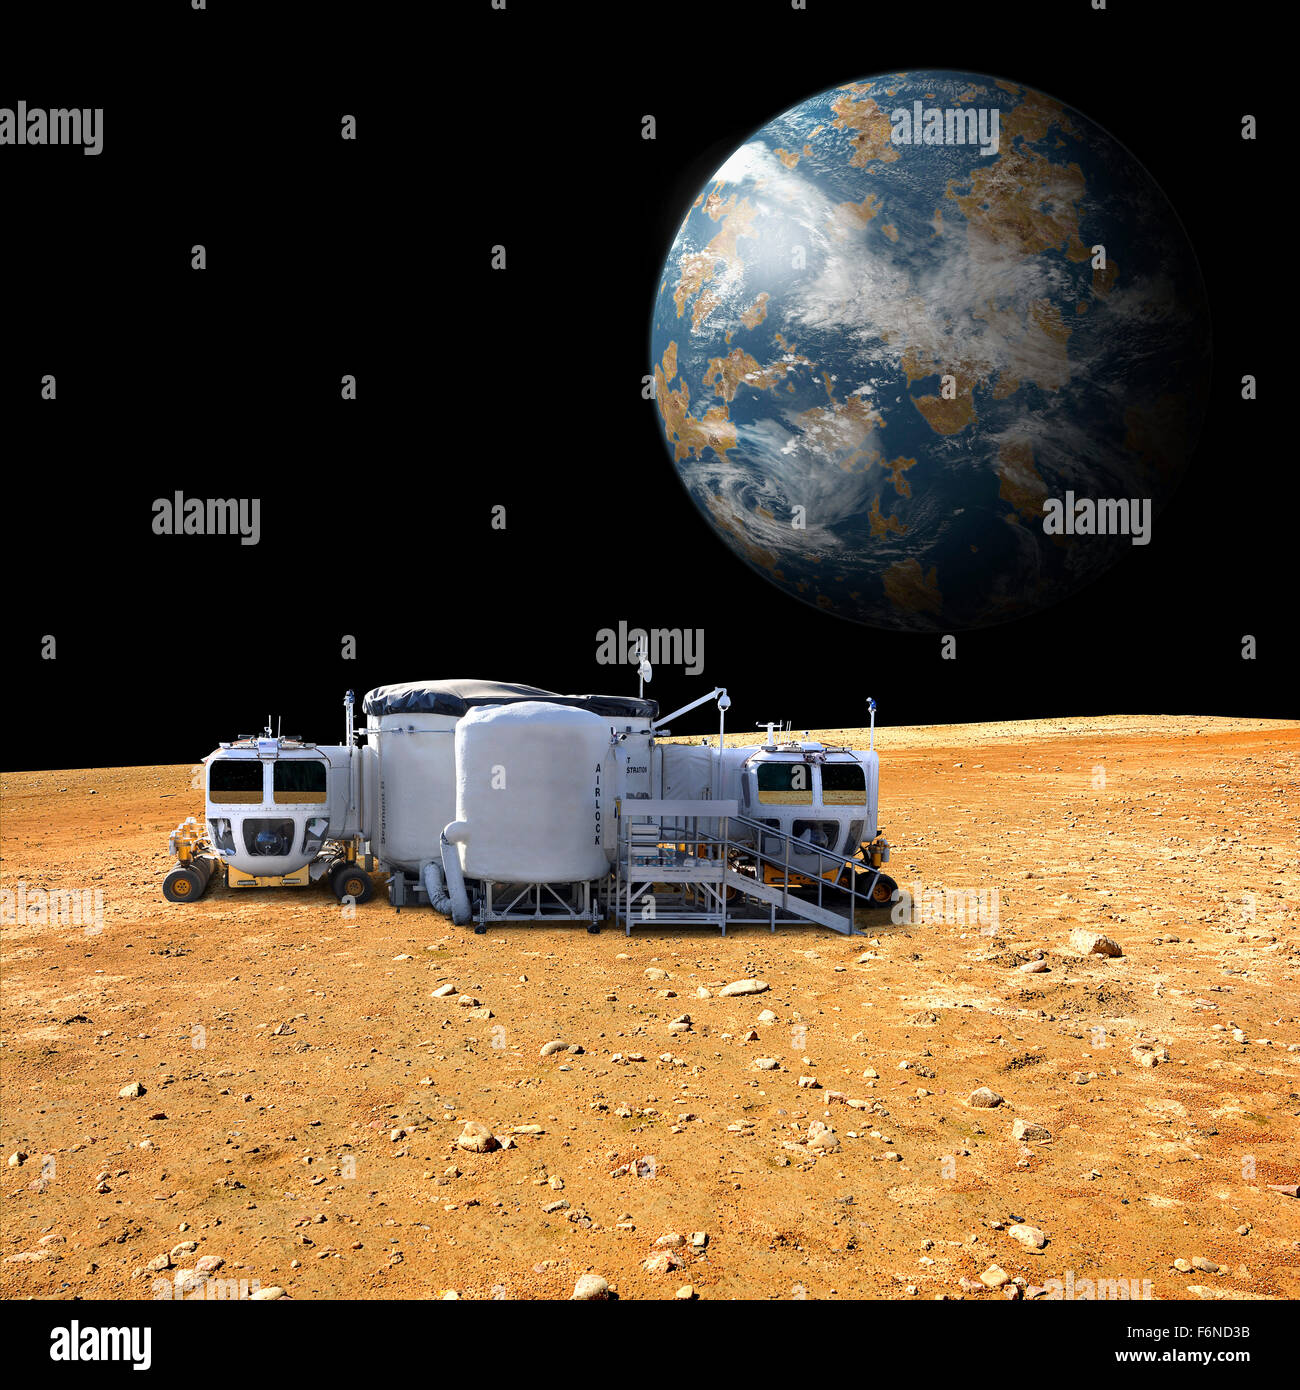 An artist's depiction of a lunar base on a barren moon. The moon's Earth-like planet rises in the background. The small colony i Stock Photo